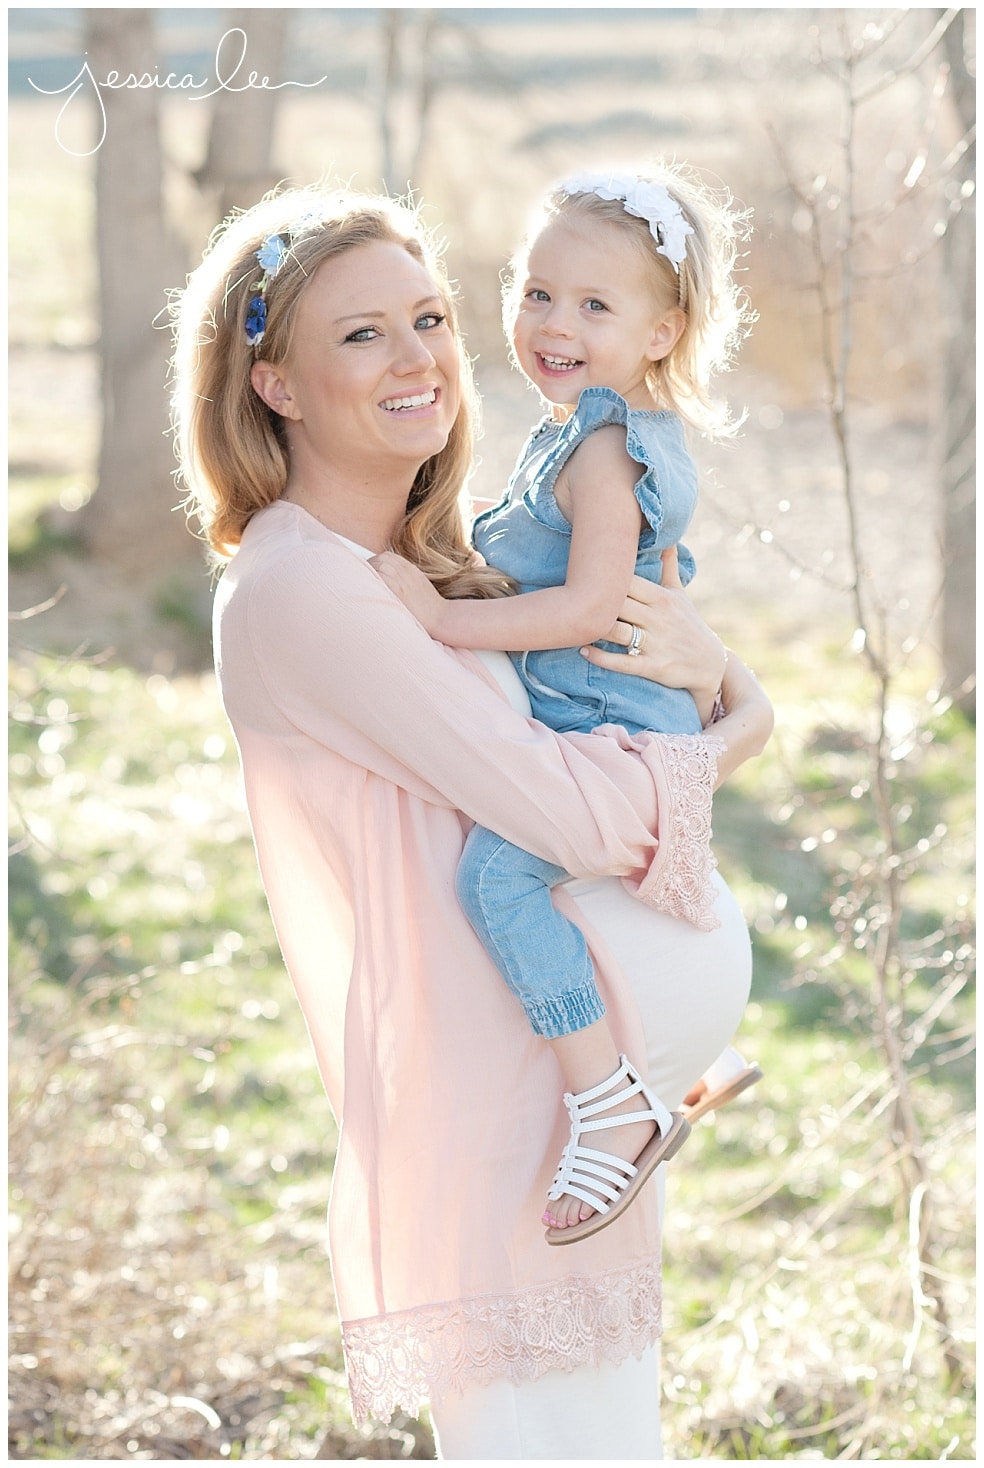 Colorado Maternity Photography, flowers in hair maternity